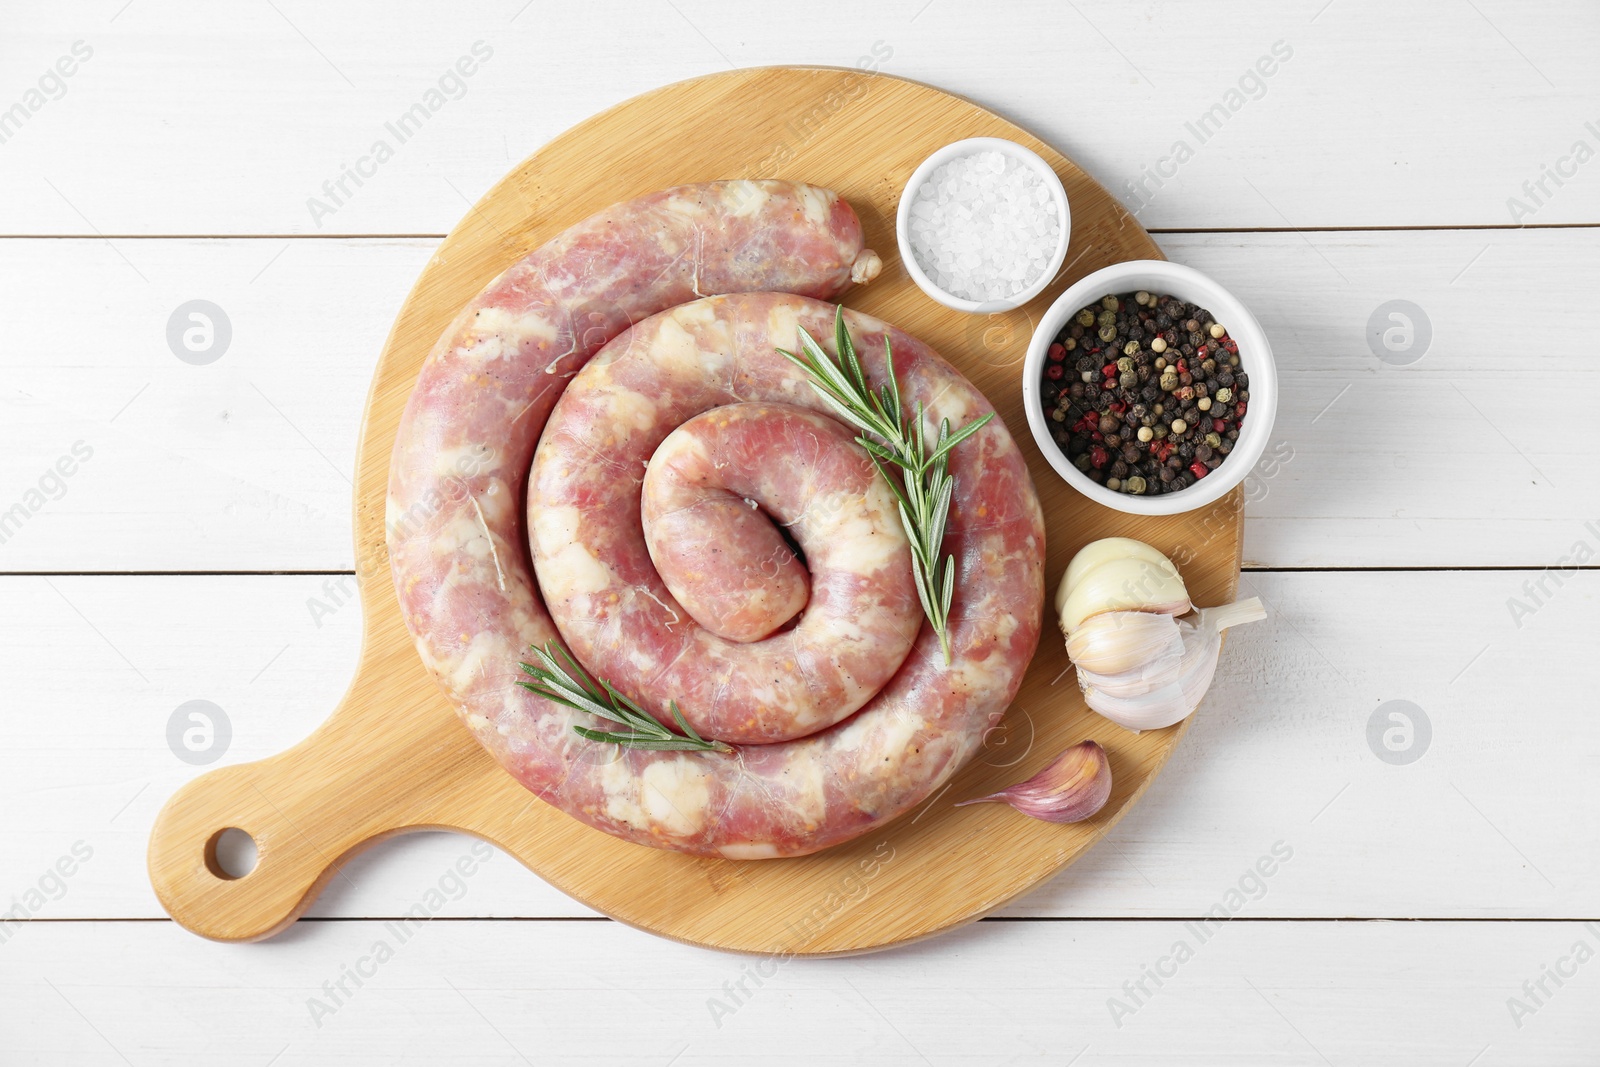 Photo of Raw homemade sausage, garlic and spices on white wooden table, top view